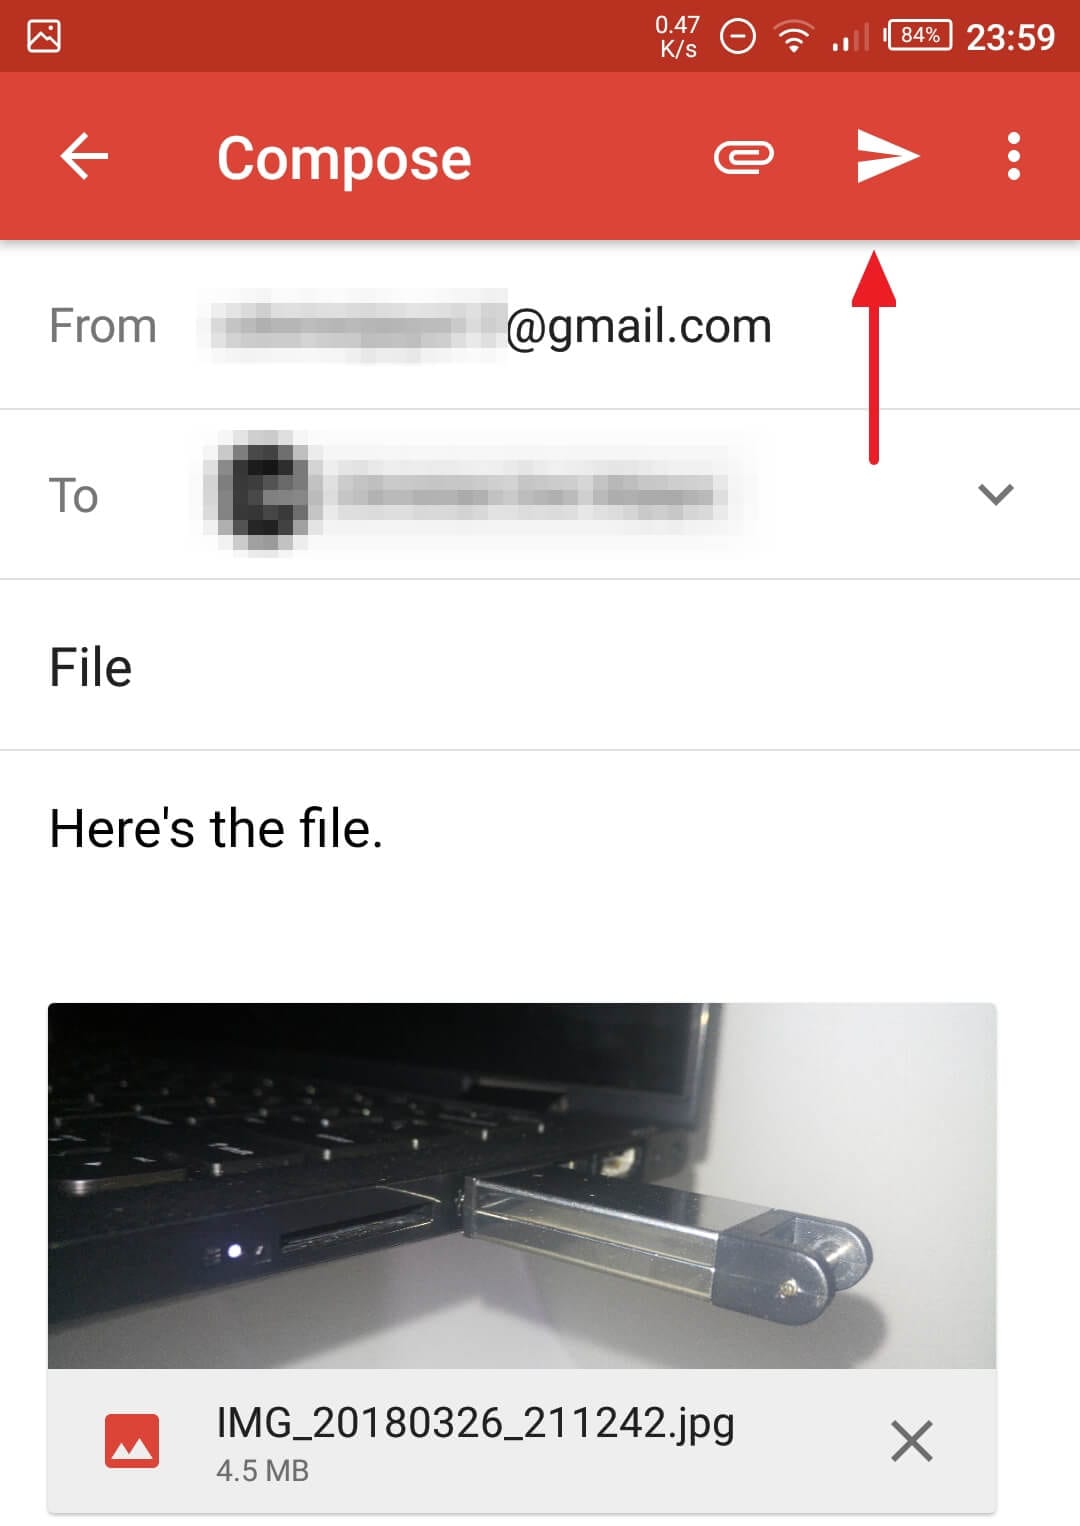 How to Attach File from USB to Email